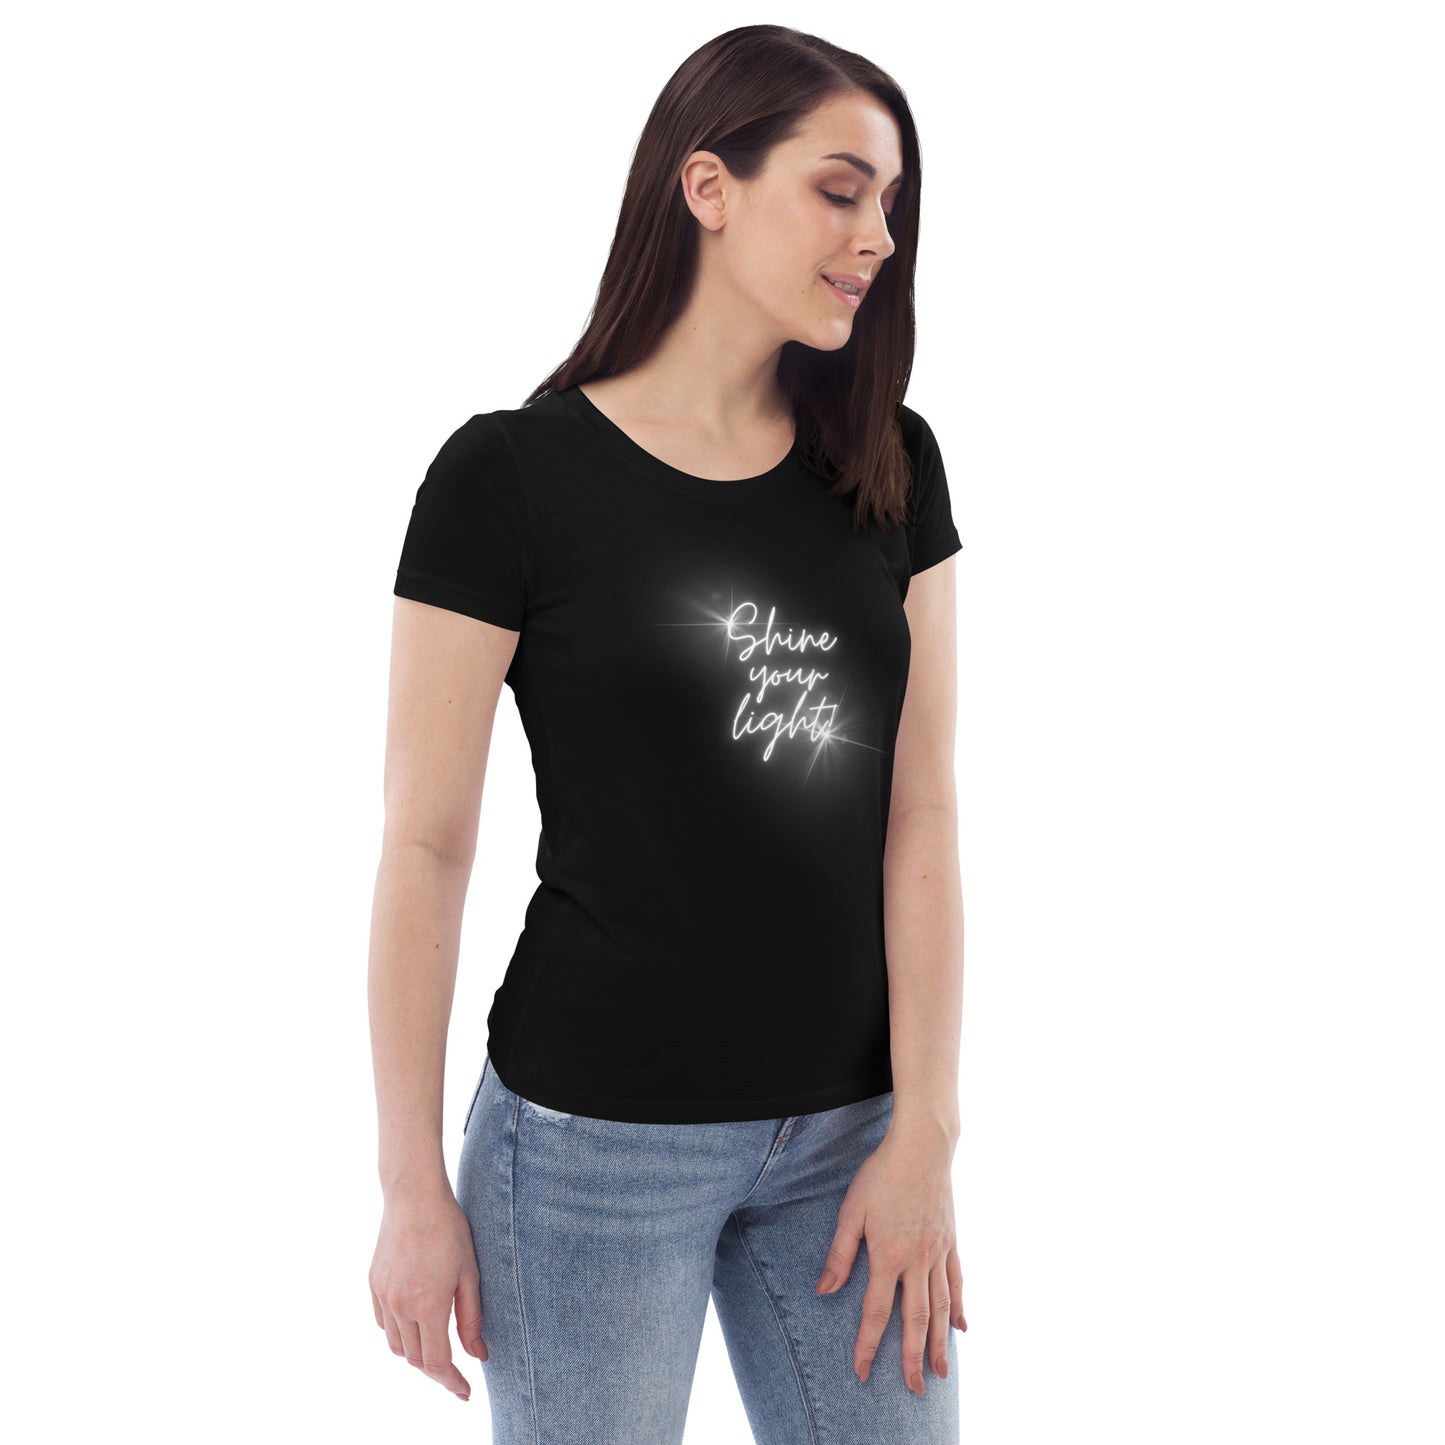 Shine Your Light - Women's fitted eco tee